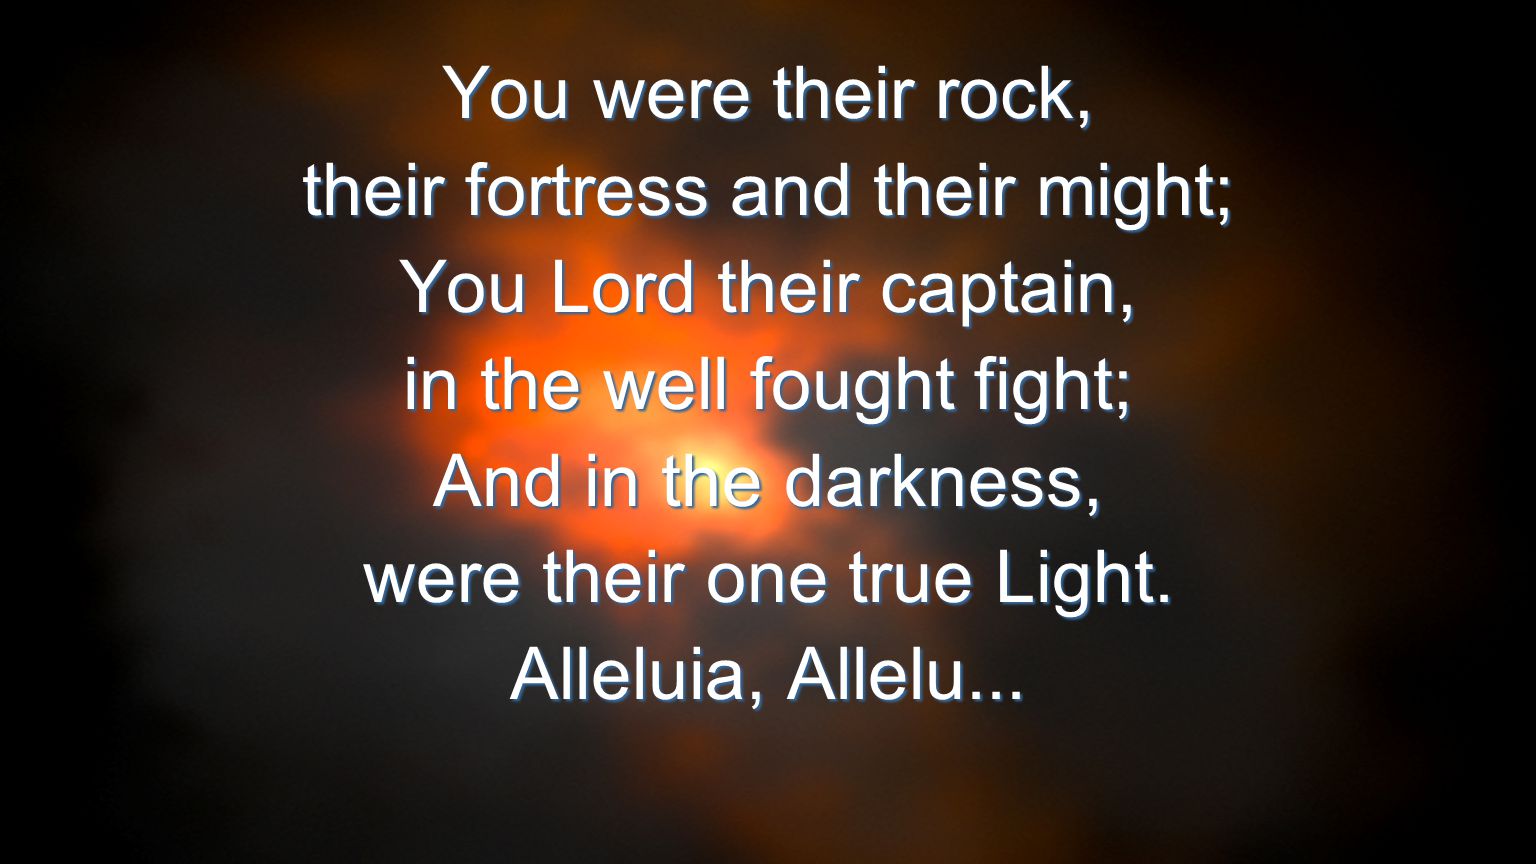 You were their rock, their fortress and their might; You Lord their captain, in the well fought fight; And in the darkness, were their one true Light.